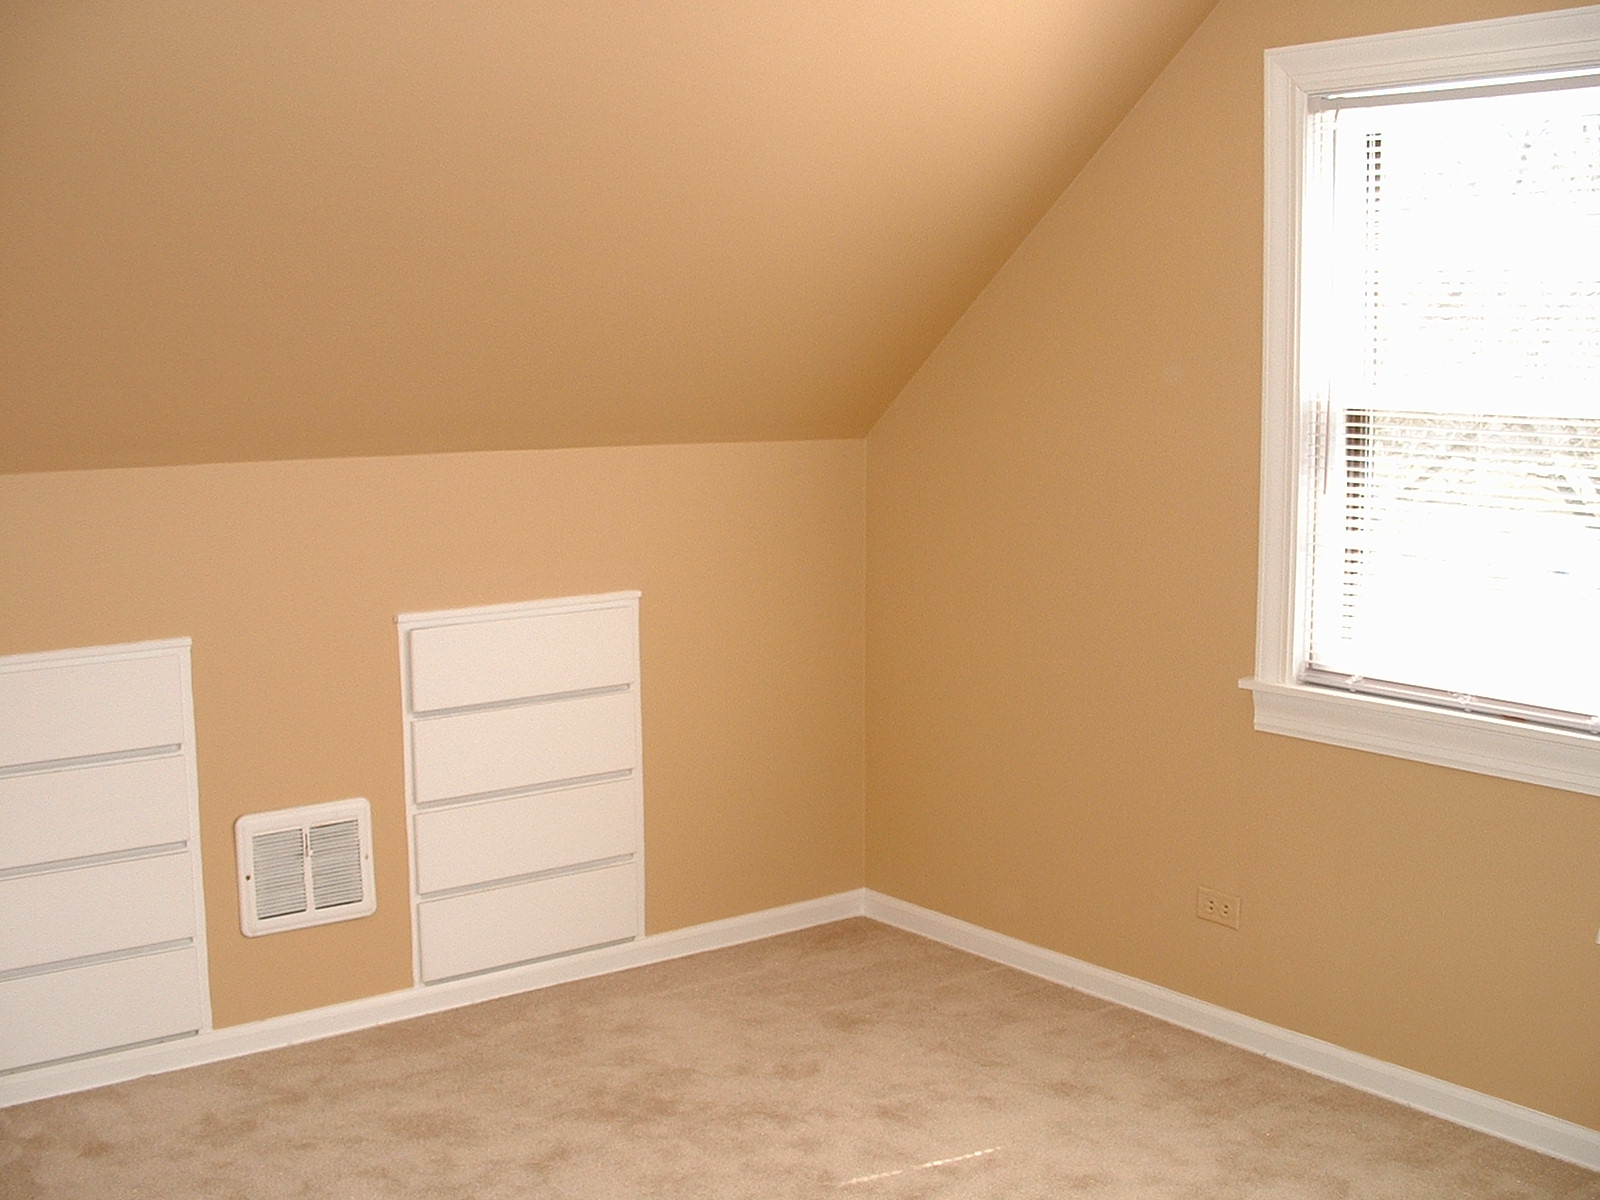 Interior Decorating Home And Garden: Master Bedroom Paint Color